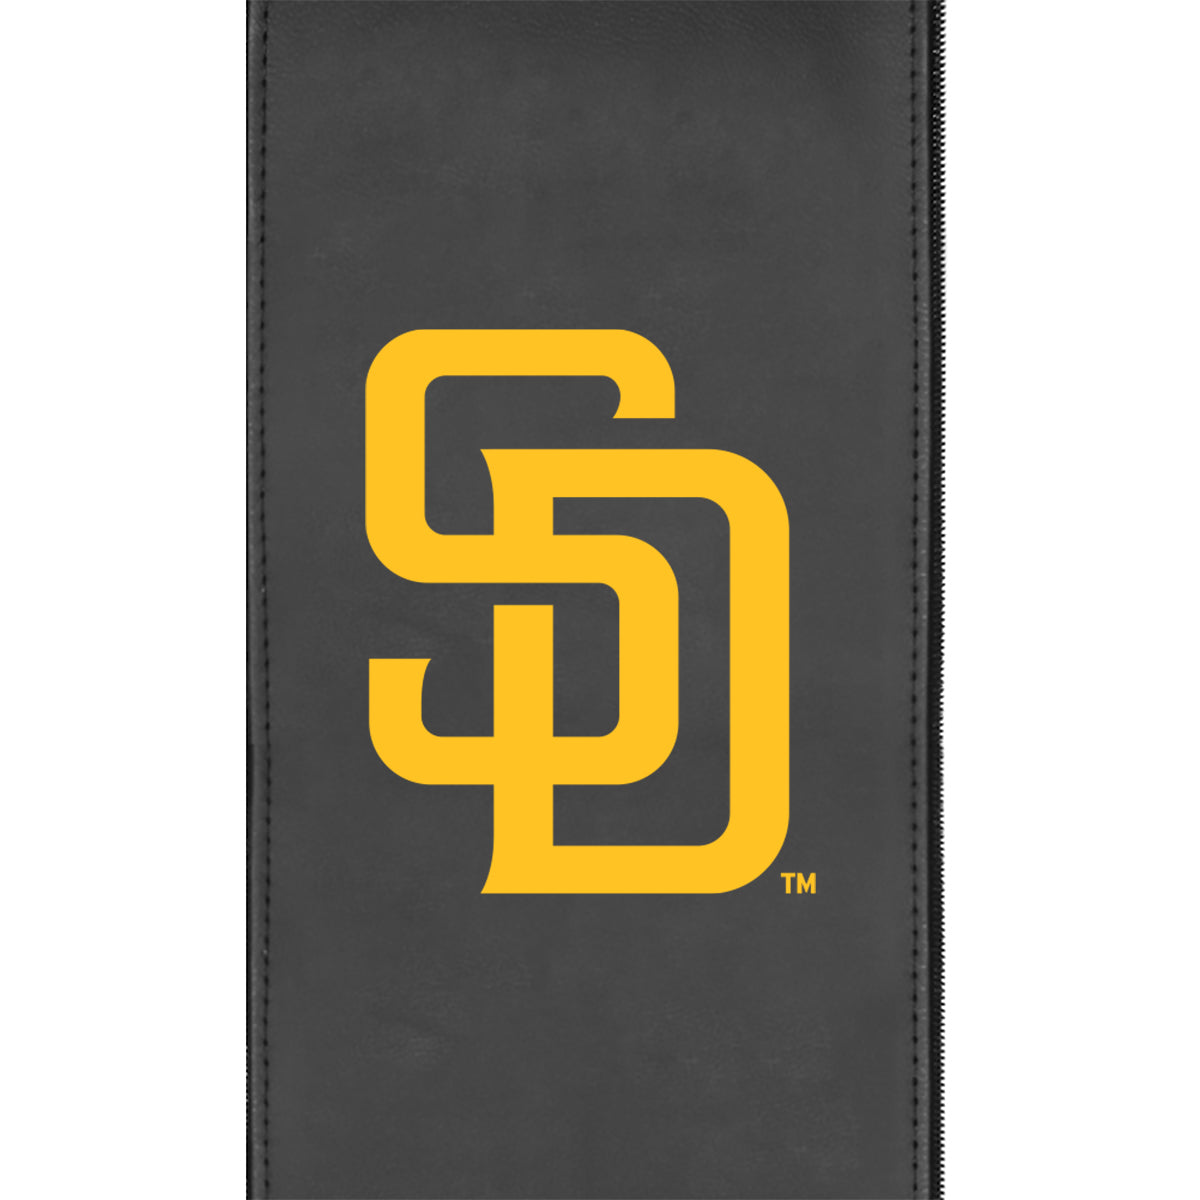 Stealth Power Plus Recliner with San Diego Padres Primary Logo